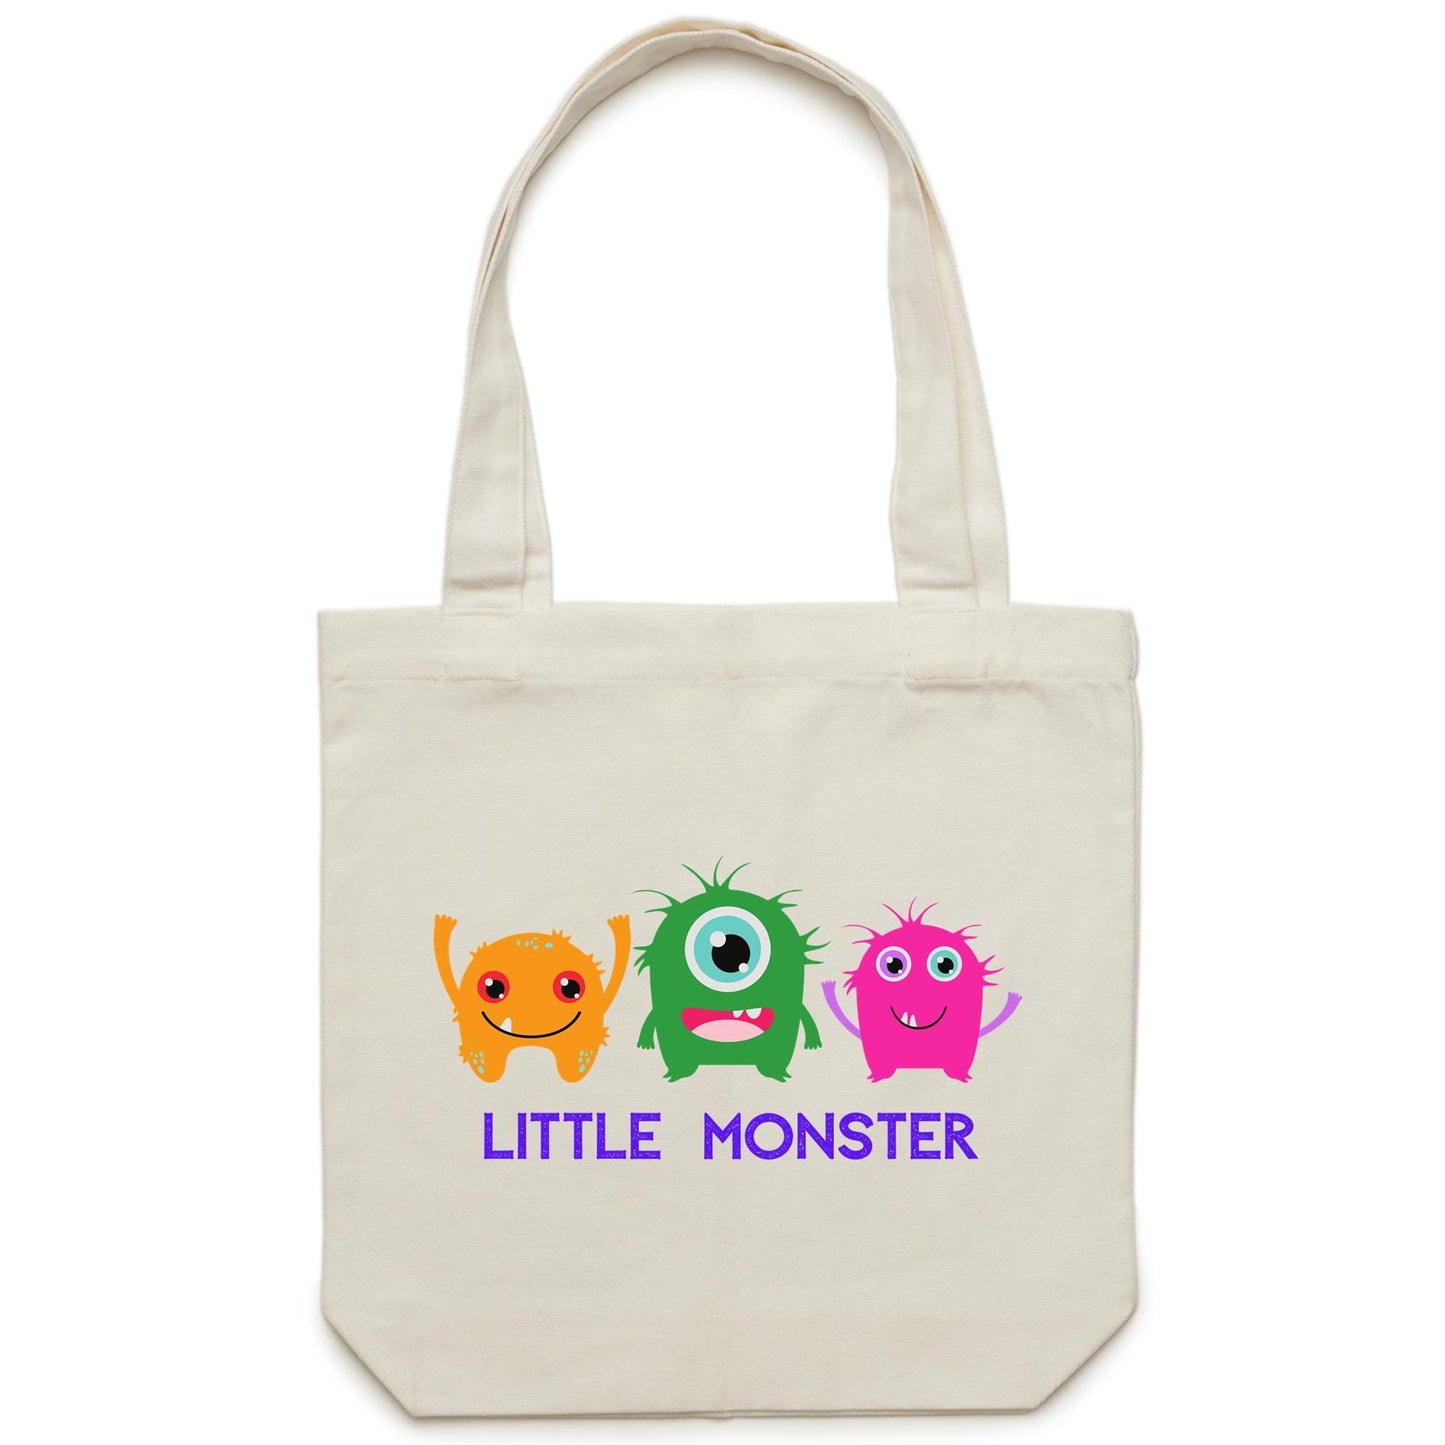 Little Monster - Canvas Tote Bag Cream One-Size Tote Bag kids